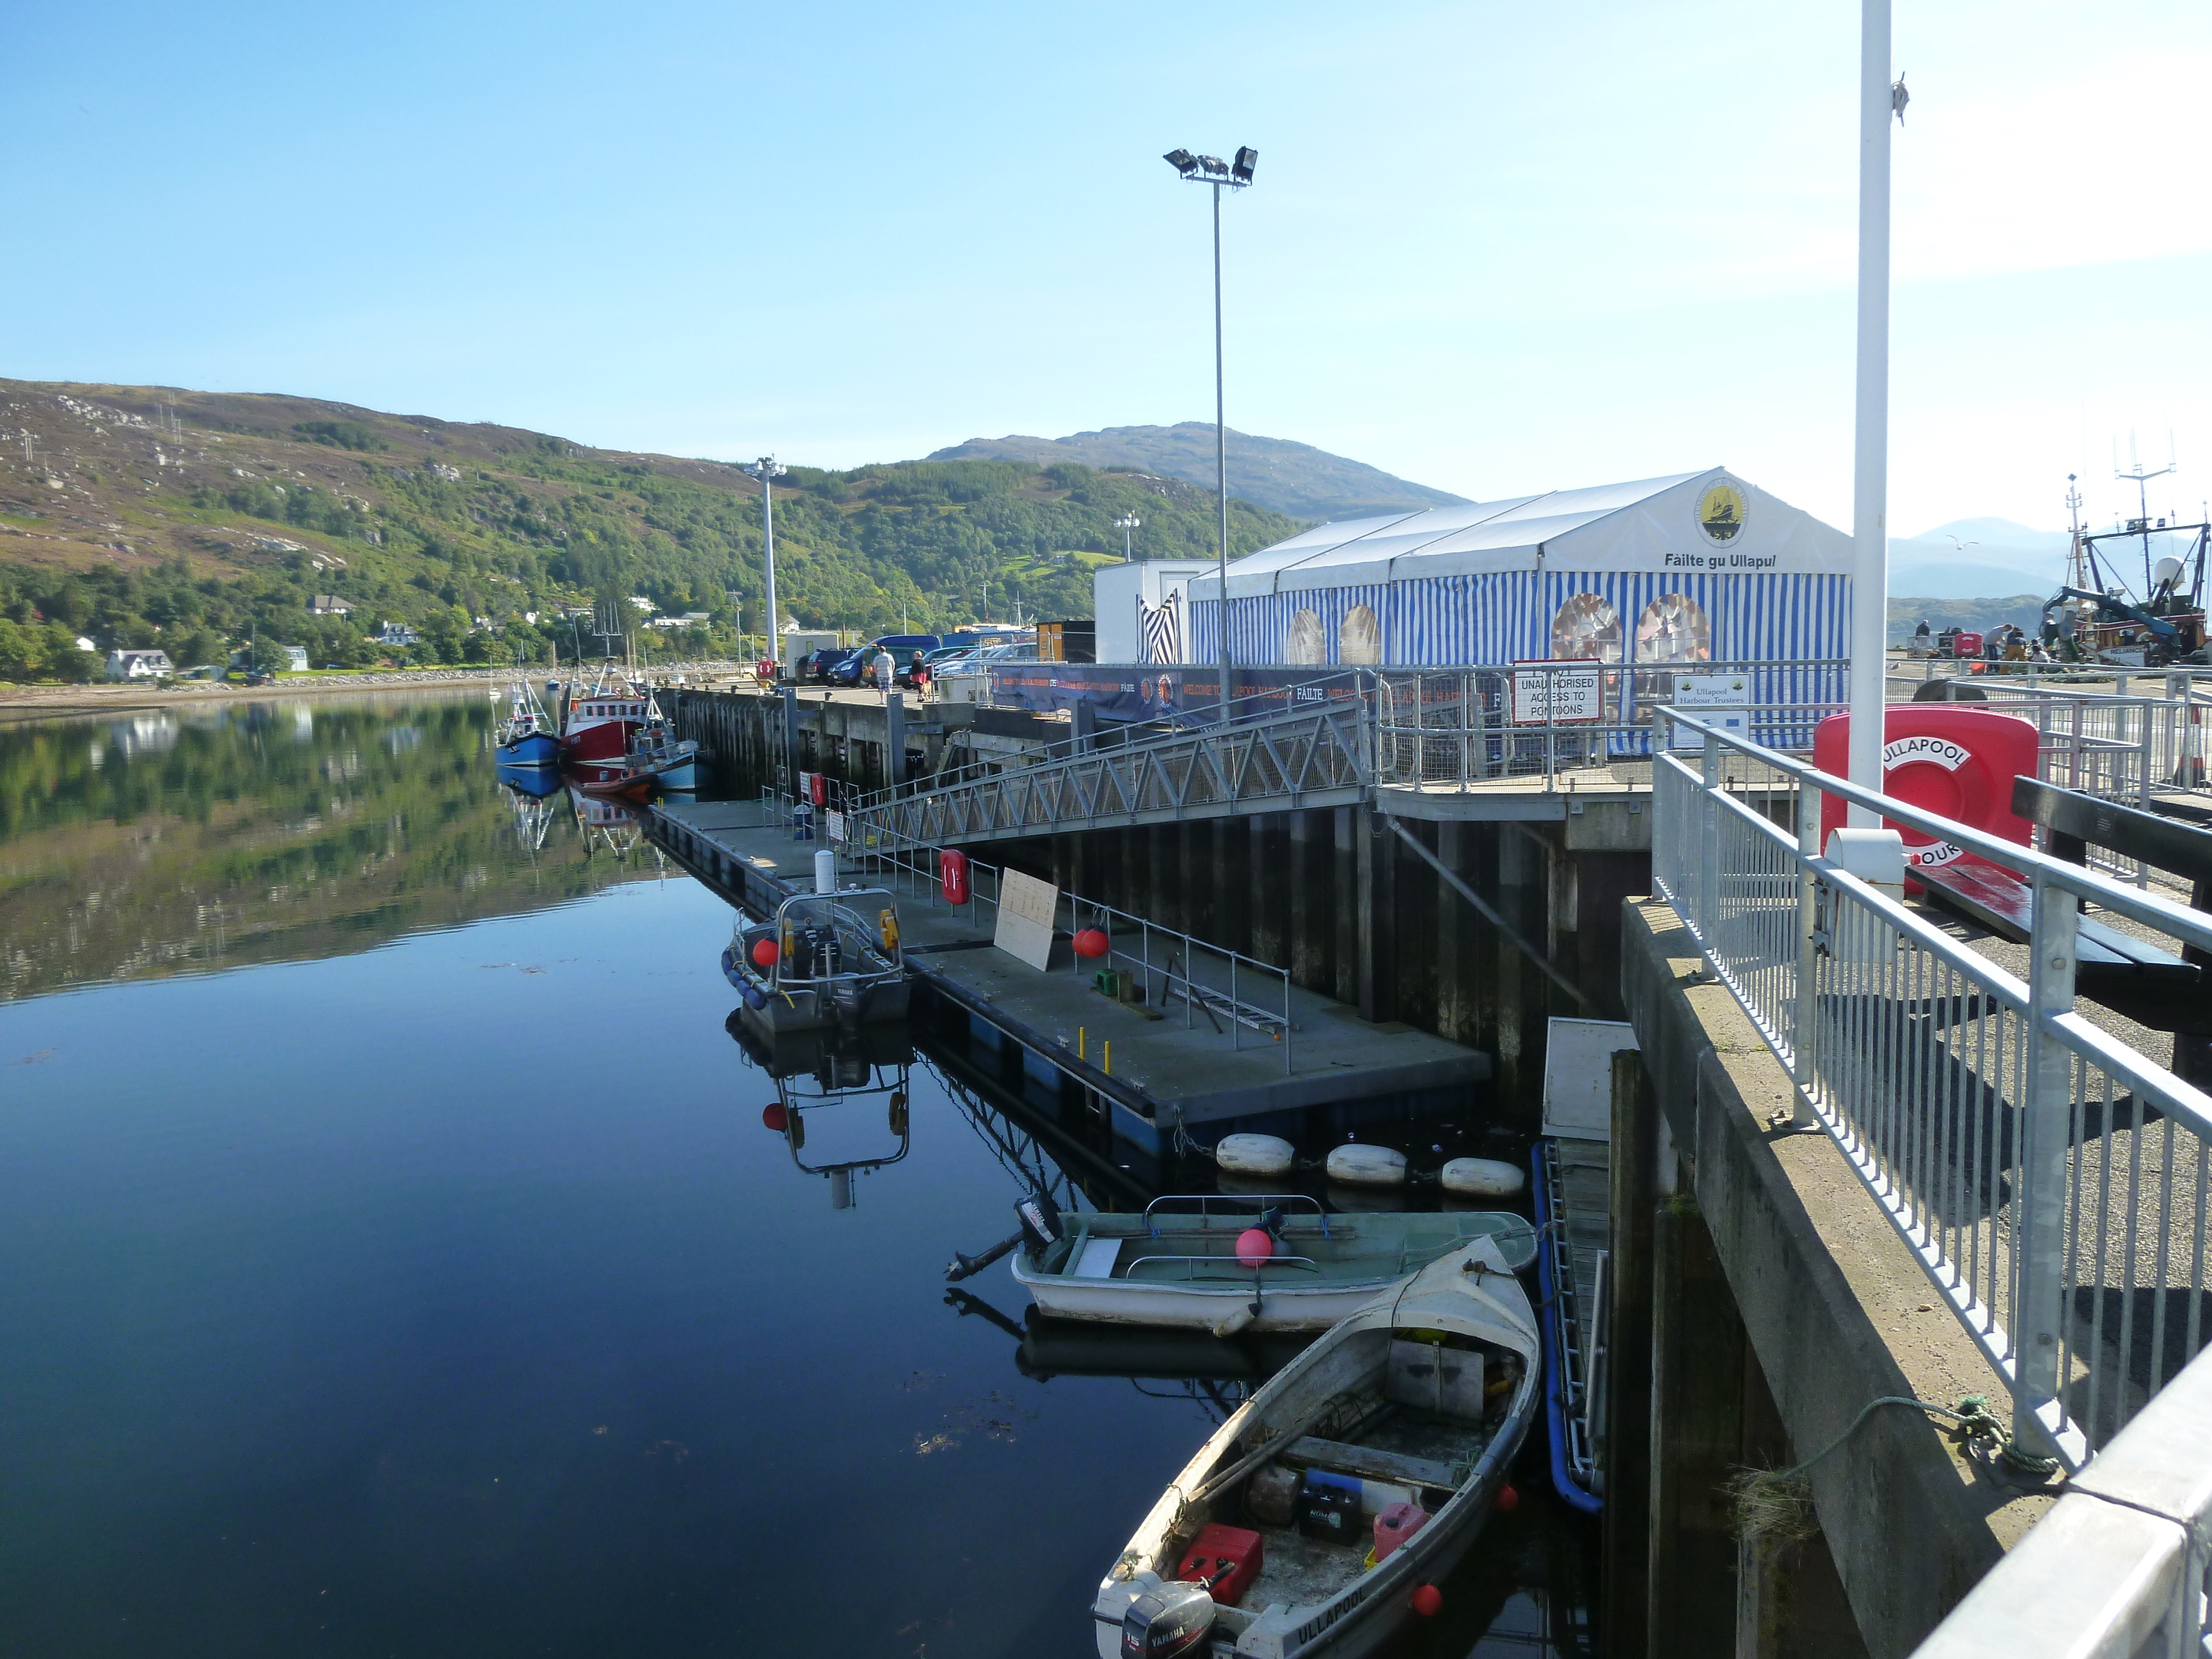 The proposed pontoons at Fort William would be similar to those in Ullapool